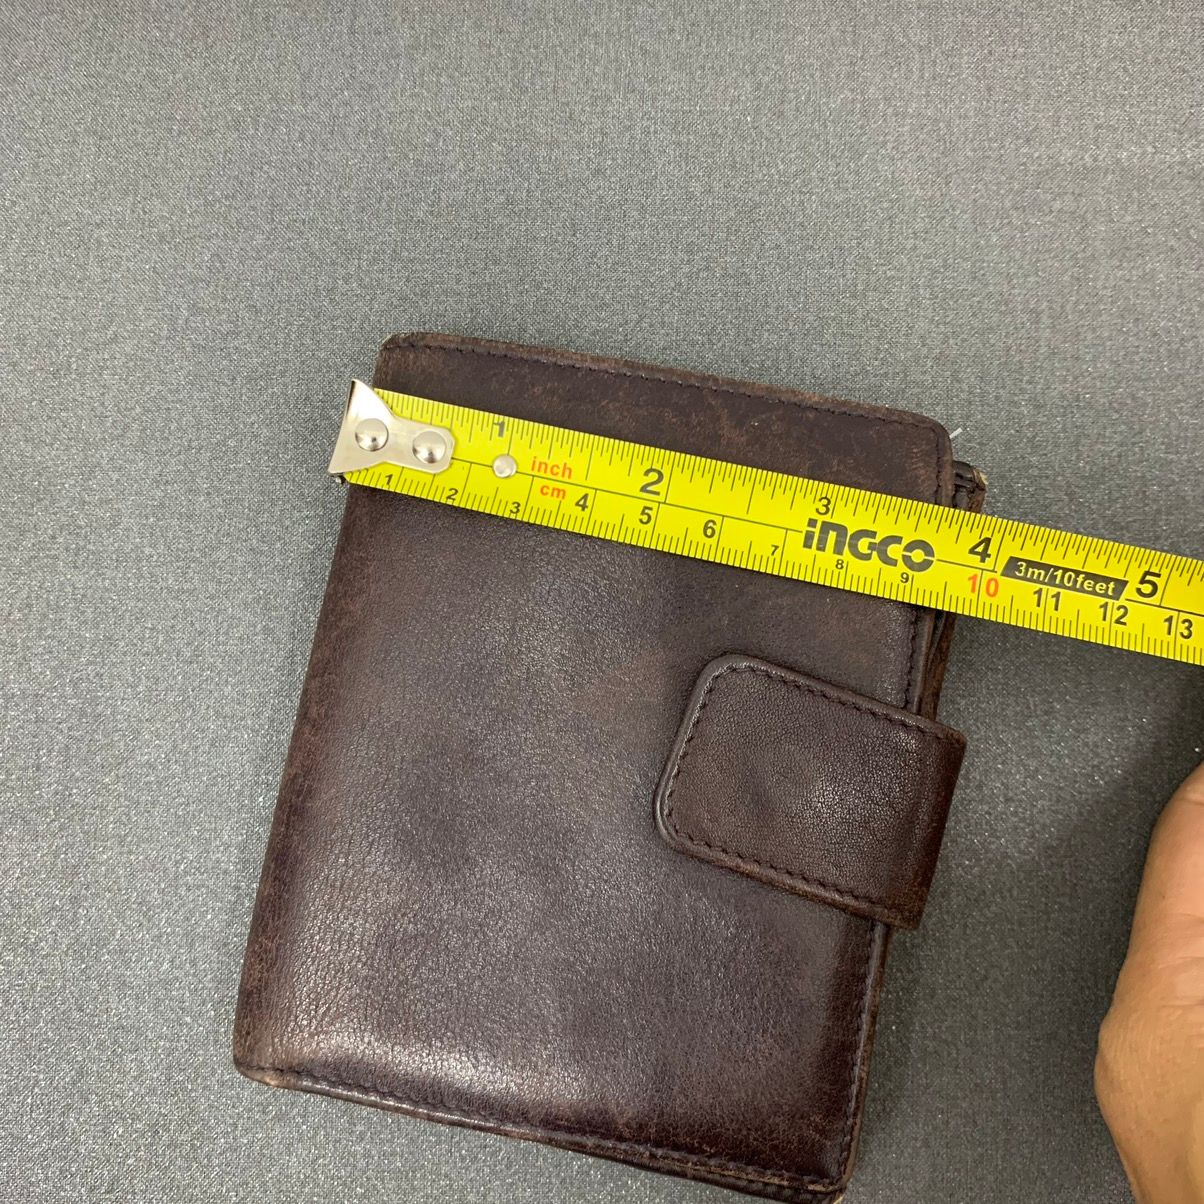 Thrashed Gucci Leather Wallet - 10